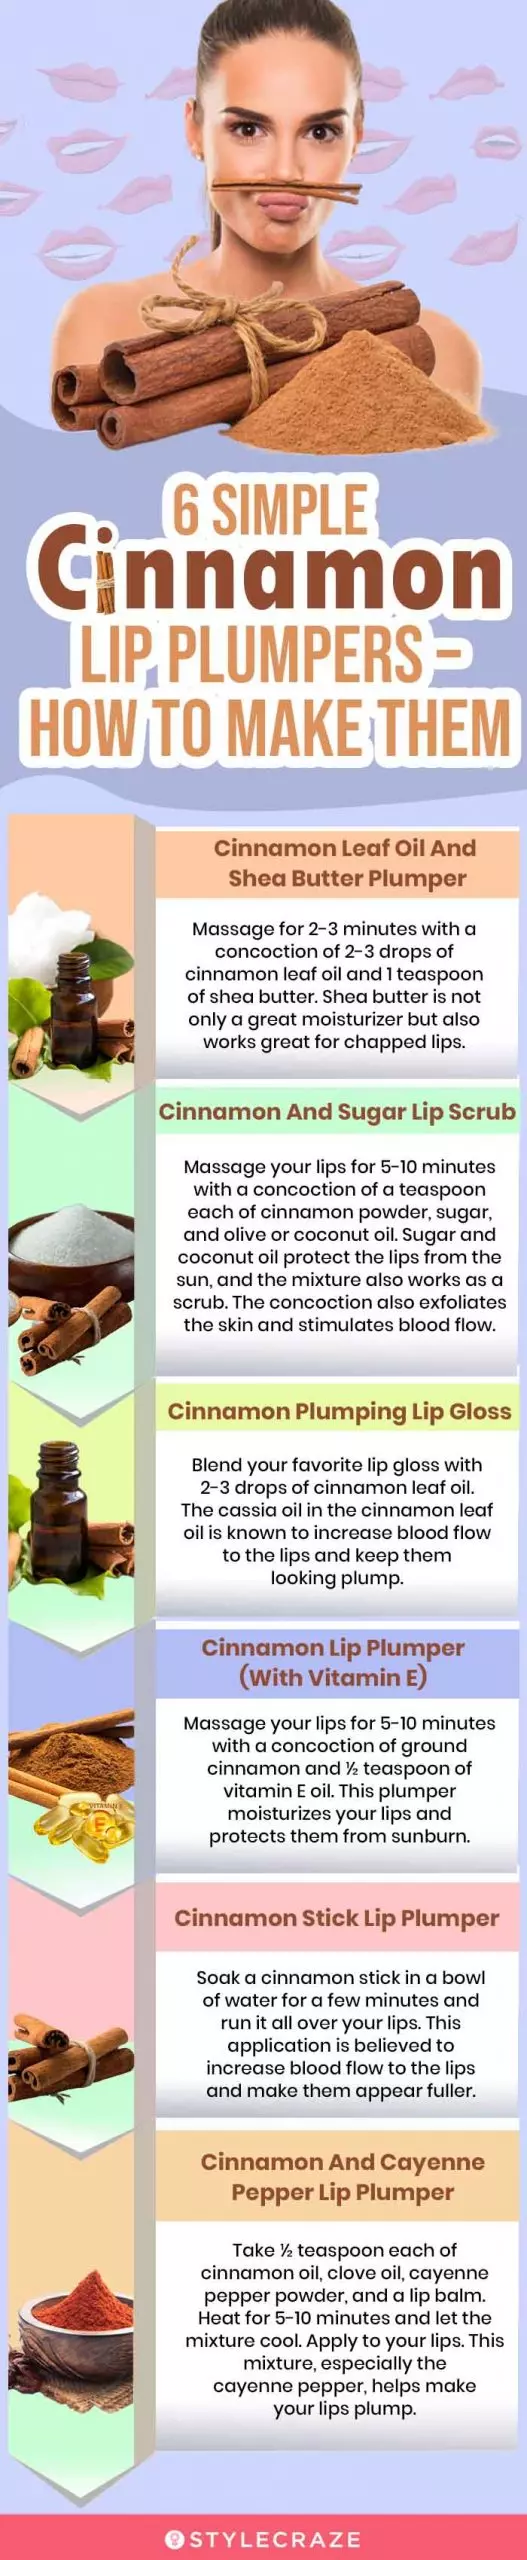 6 simple cinnamon lip plumpers – how to make them (infographic)